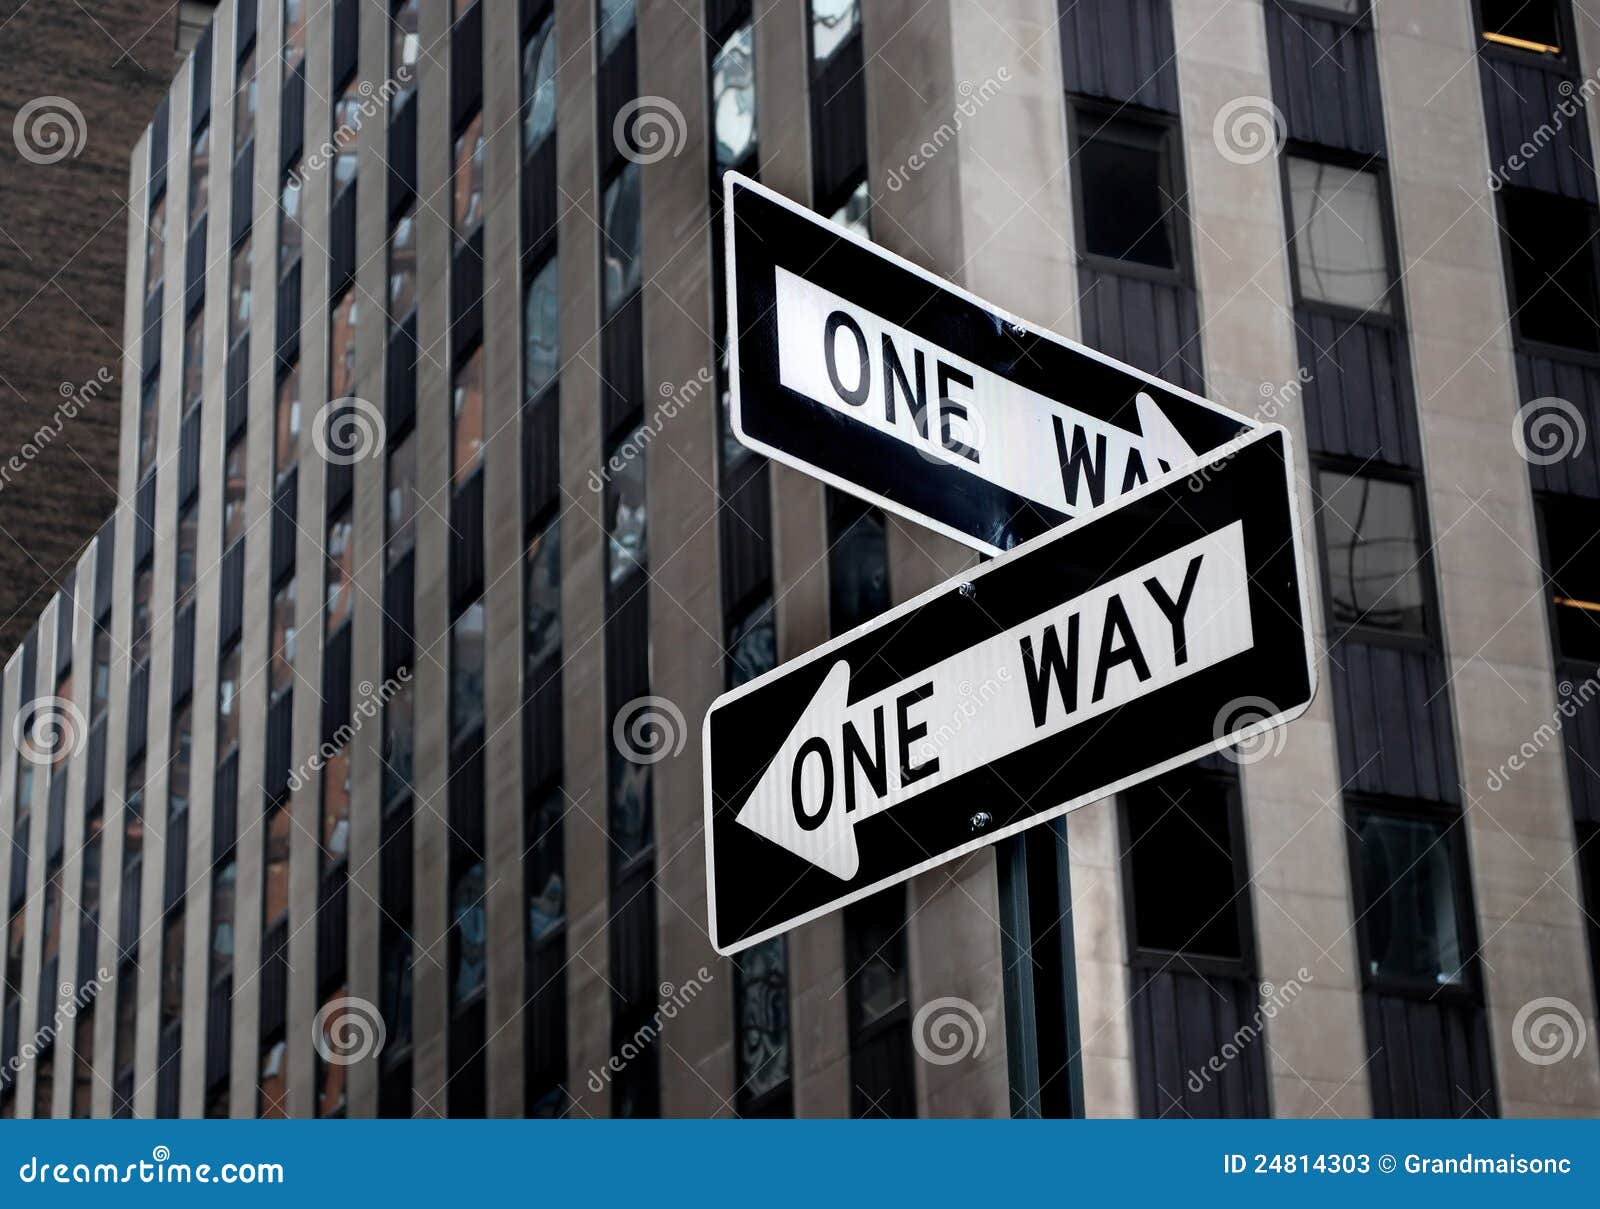 One Way Road Sign Stock Photos - Image: 24814303
 One Way Street Signs